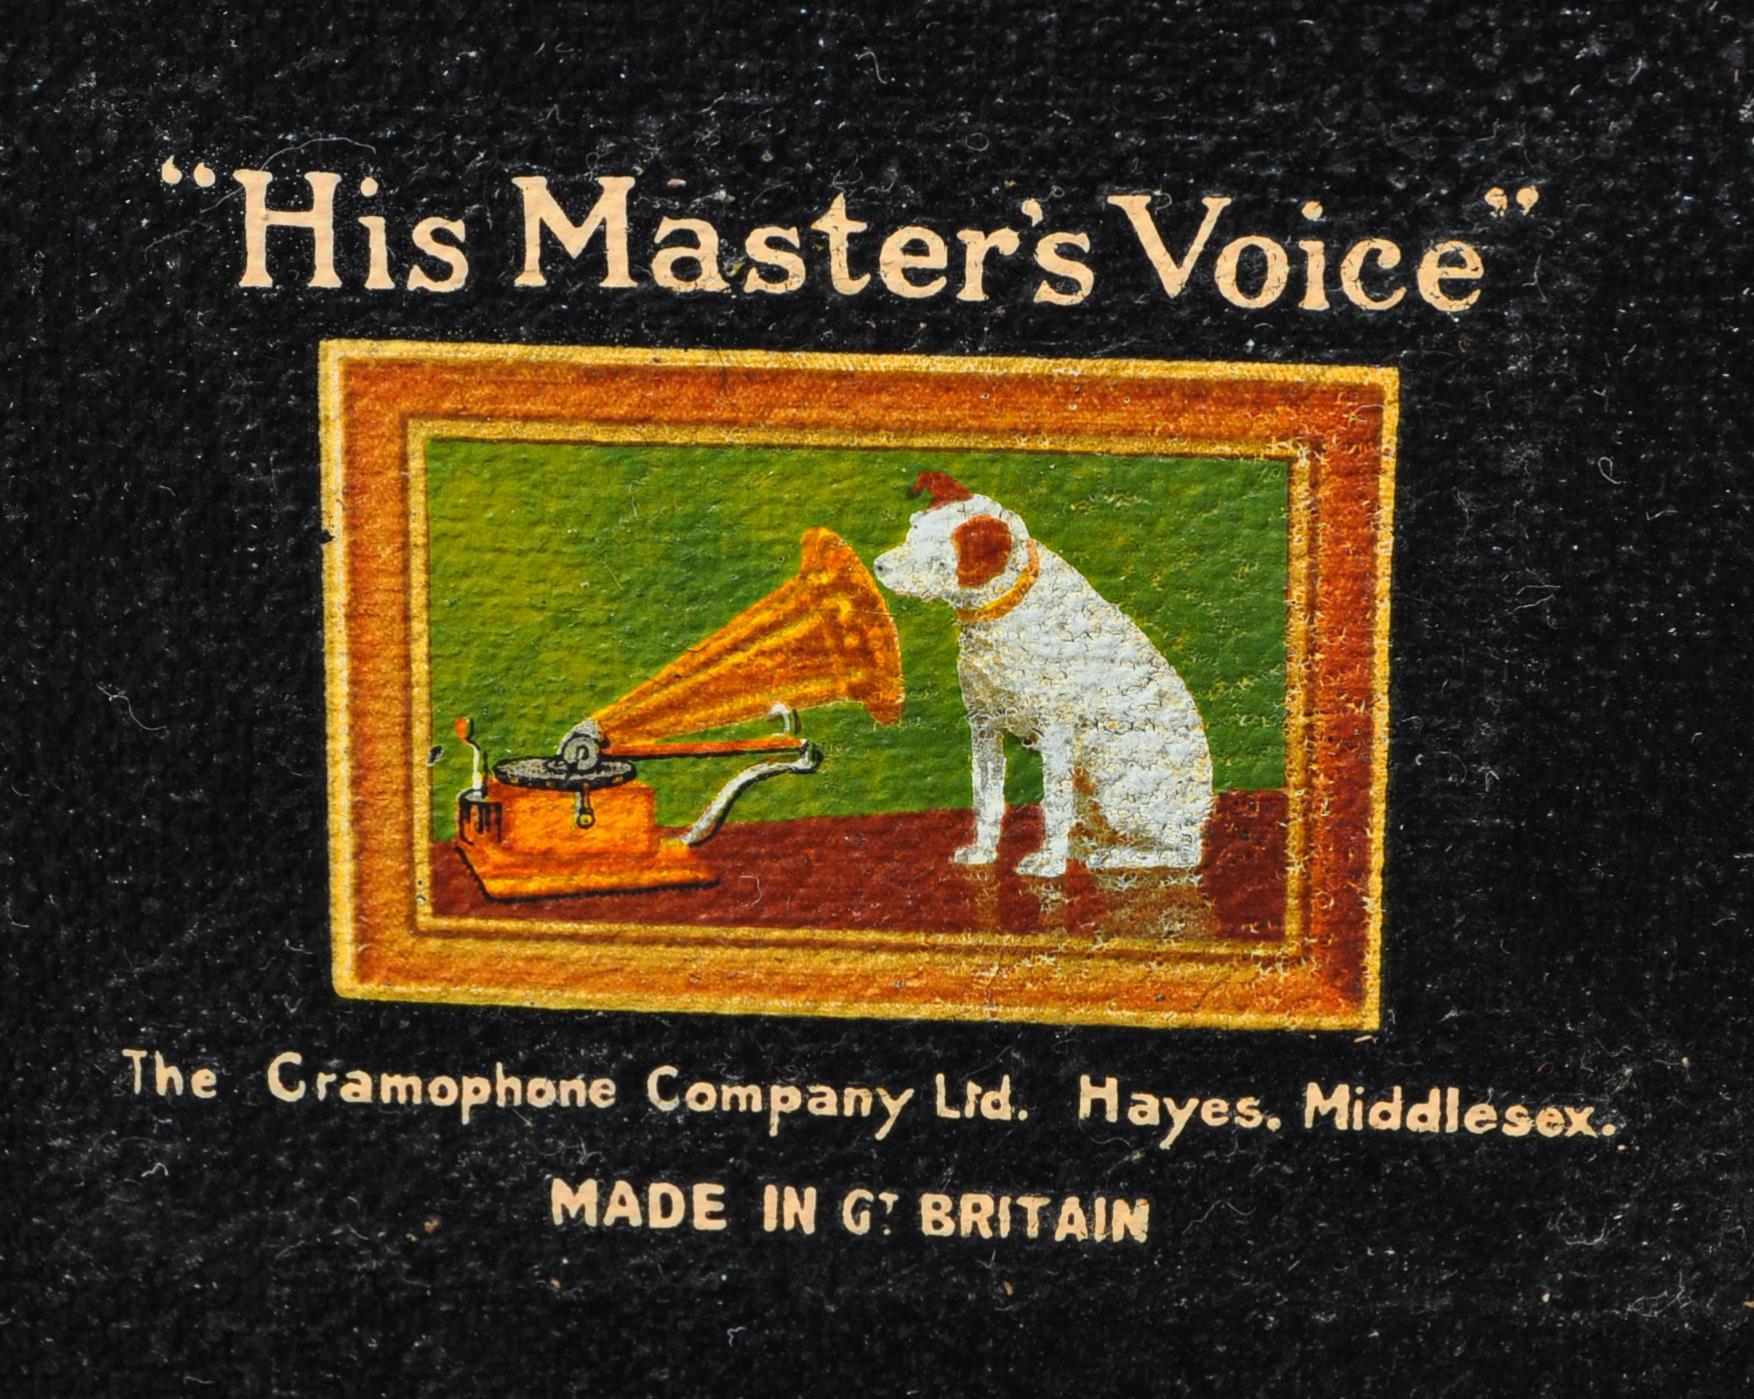 VINTAGE HIS MASTER'S VOICE GRAMOPHONE PLAYER - Image 5 of 6